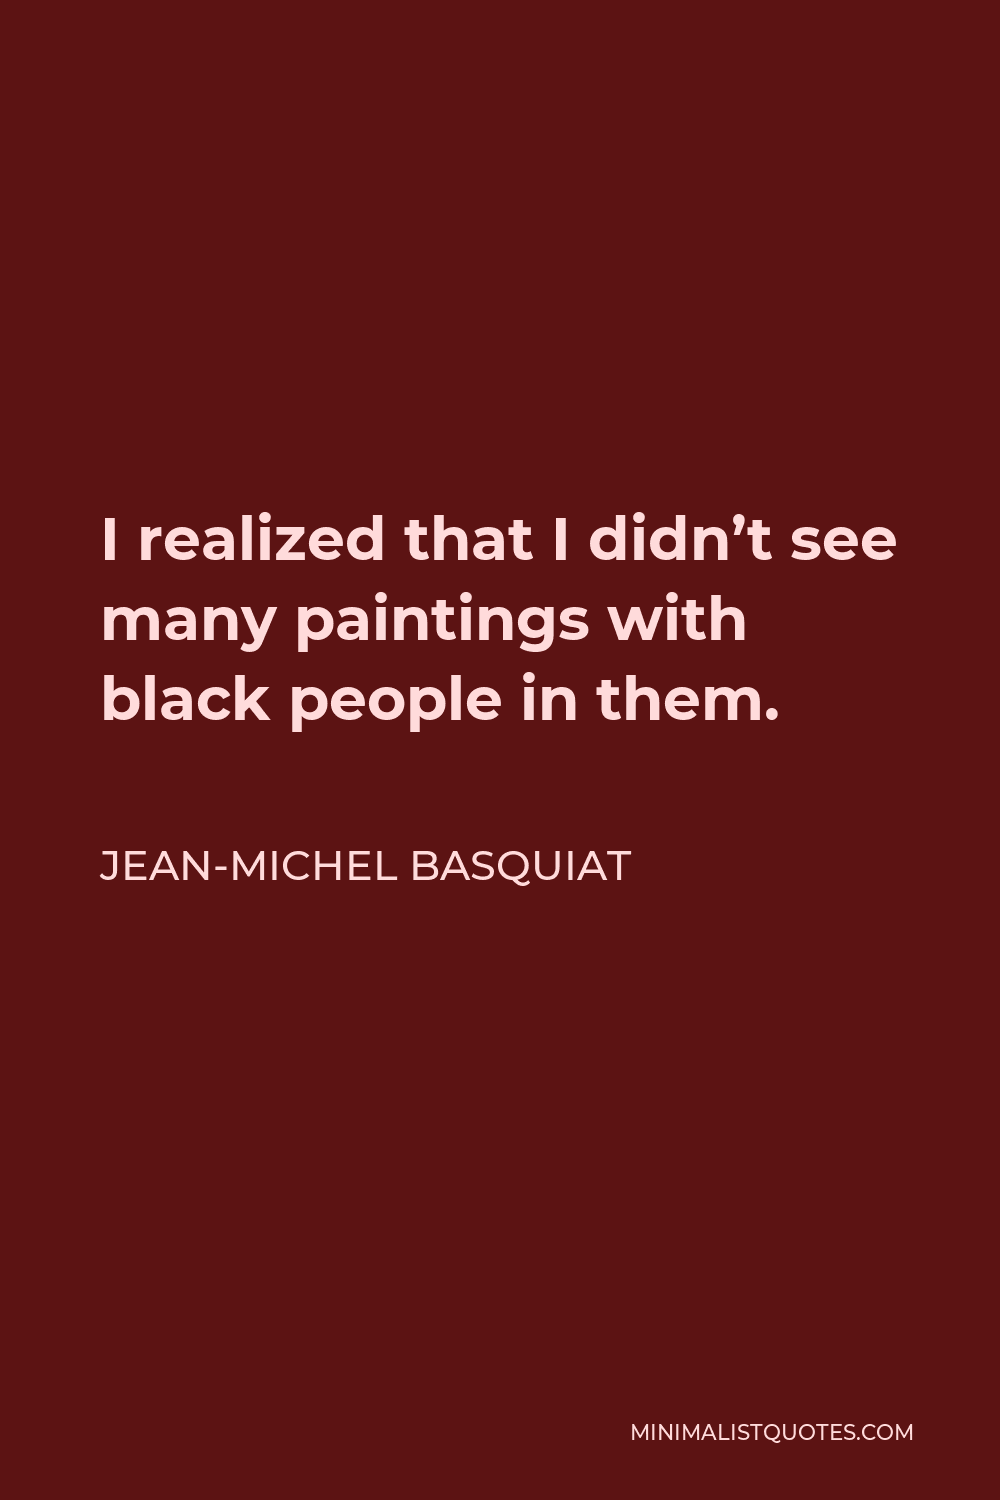 Jean-Michel Basquiat Quote - I realized that I didn’t see many paintings with black people in them.